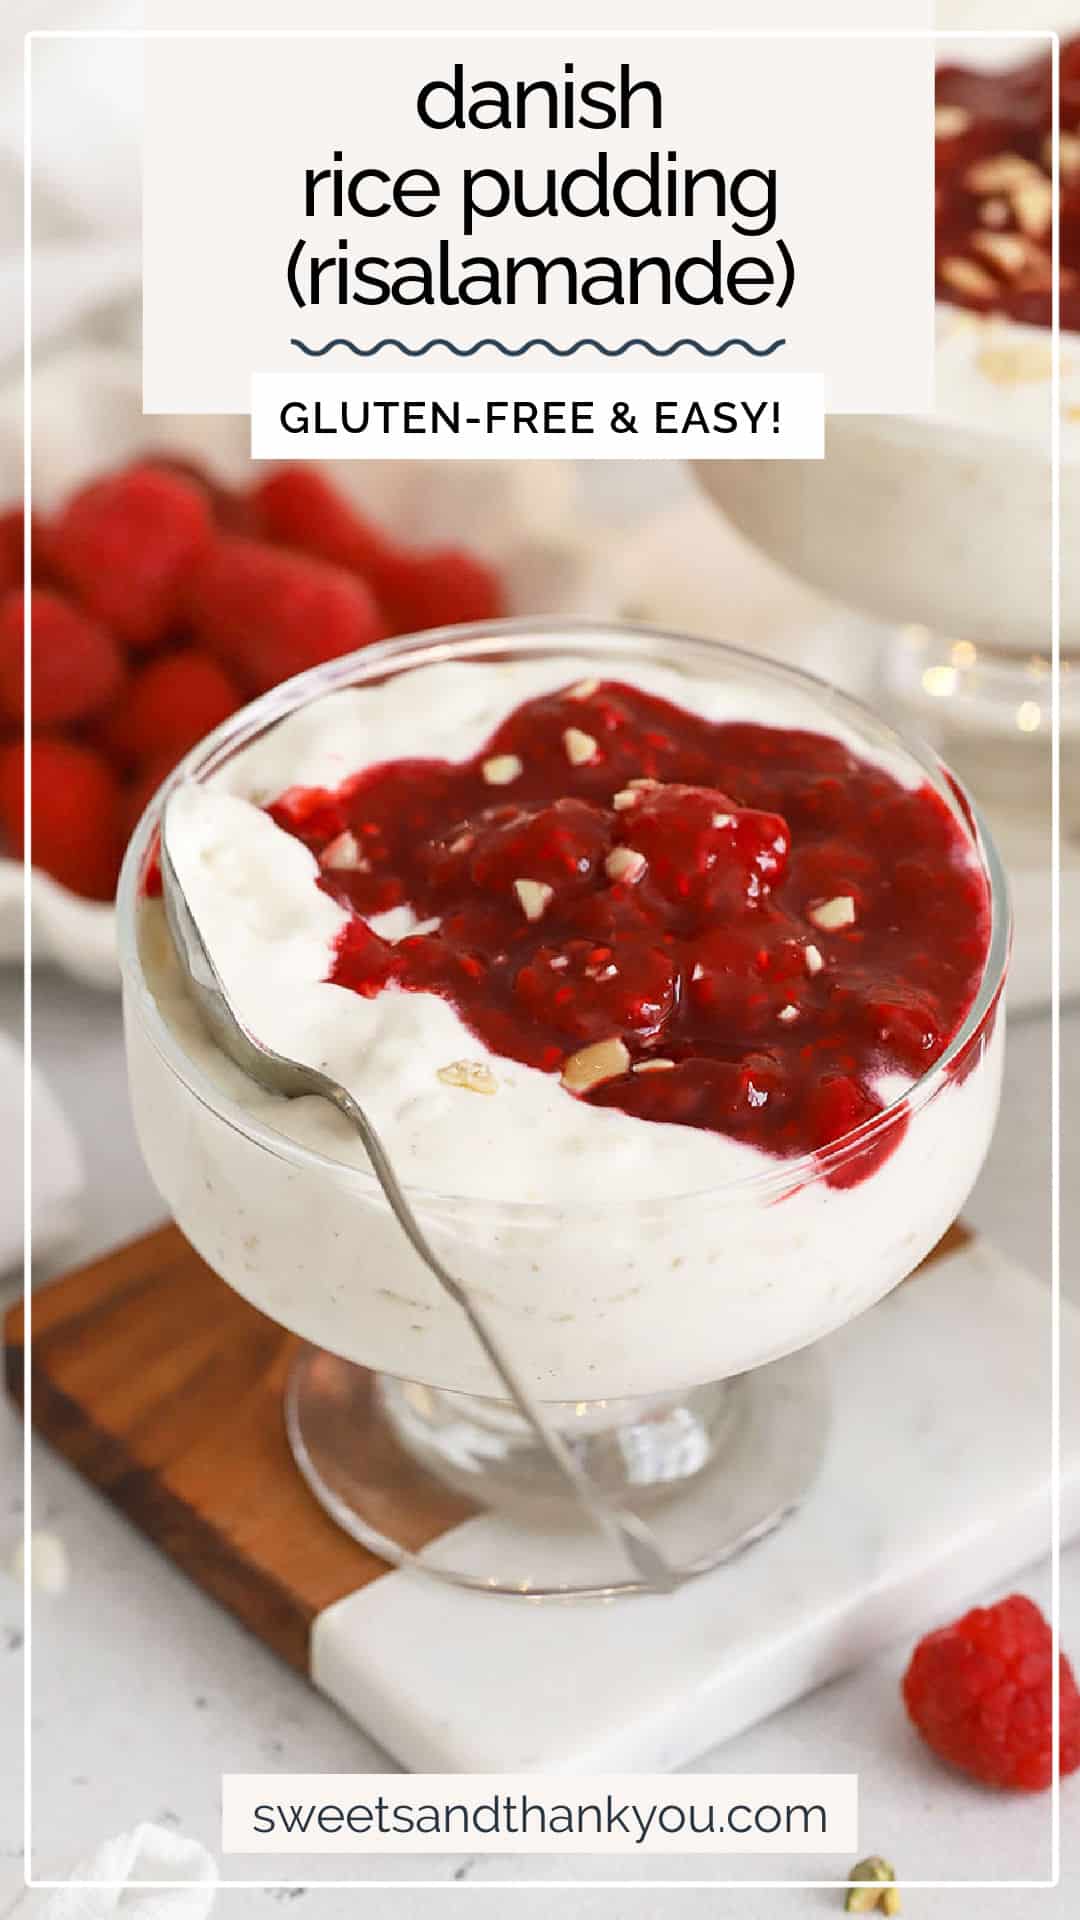 This traditional Danish Rice Pudding recipe (risalamande) is the perfect holiday dessert. Try this rice pudding with raspberry sauce or add cherry sauce! This light, festive risalamande is always a hit for a traditional Christmas Eve dessert or your holiday celebration. (Don't miss learning about the fun game you play to win the almond present when eating it!) It's the perfect gluten-free dessert to add to your Christmas dinner. 